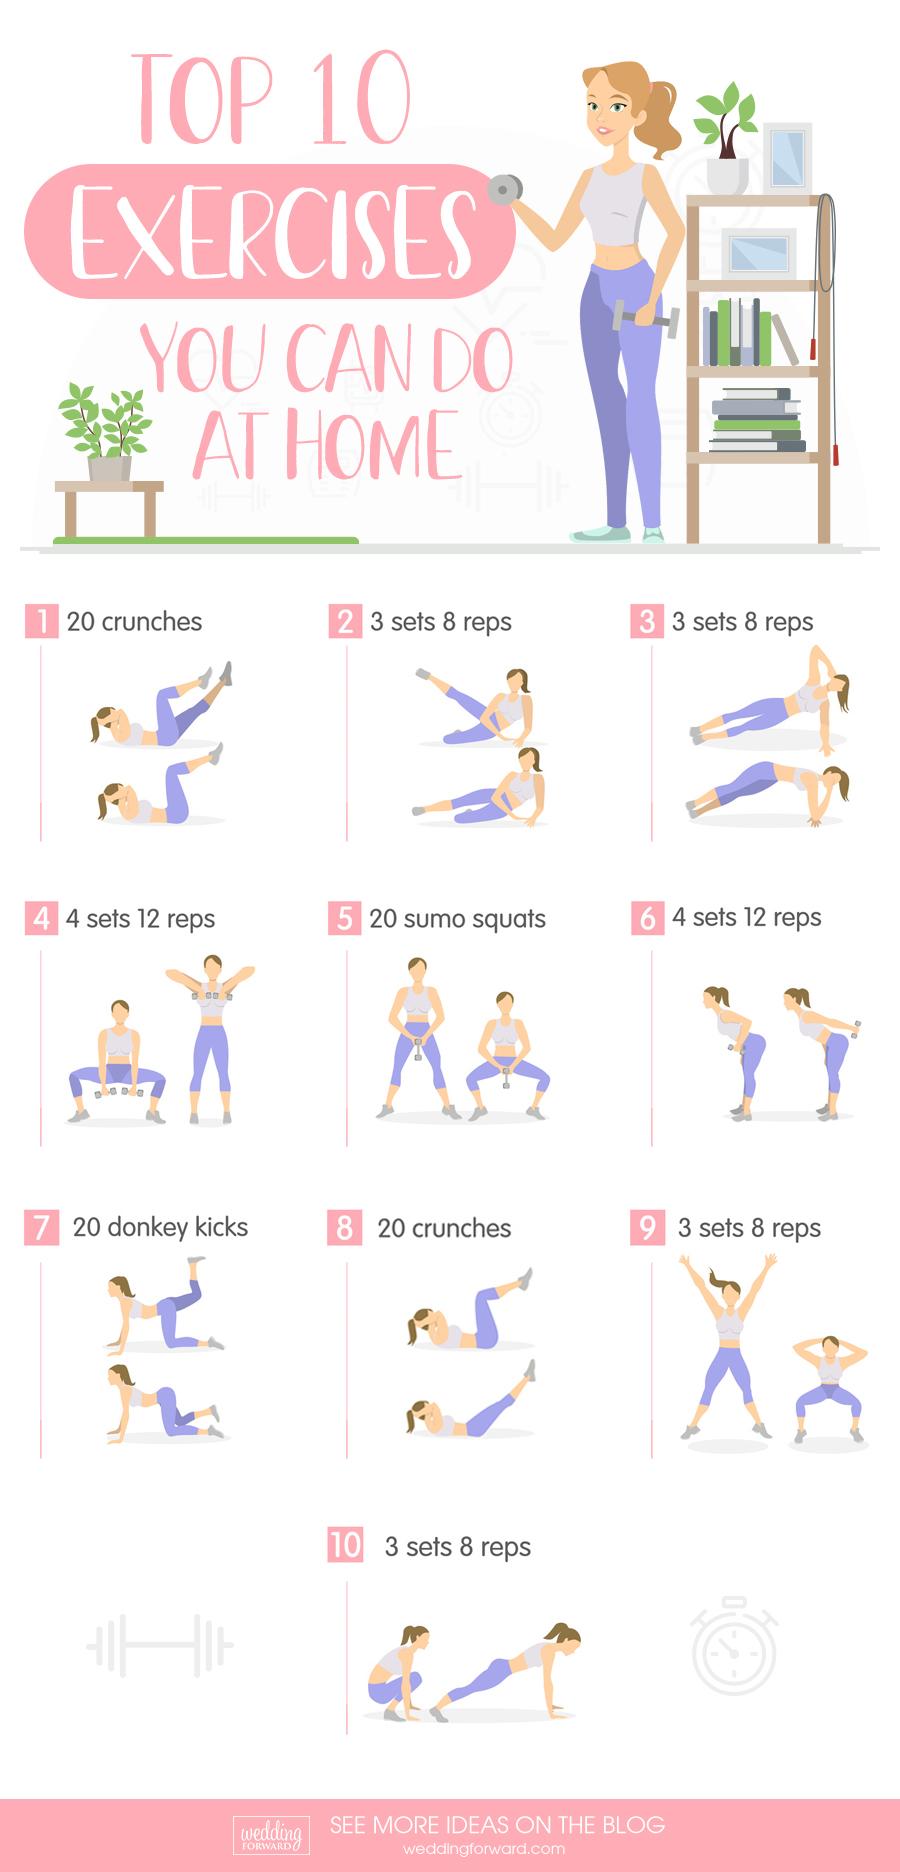 wedding weightloss top exercises to do at home wedding workout